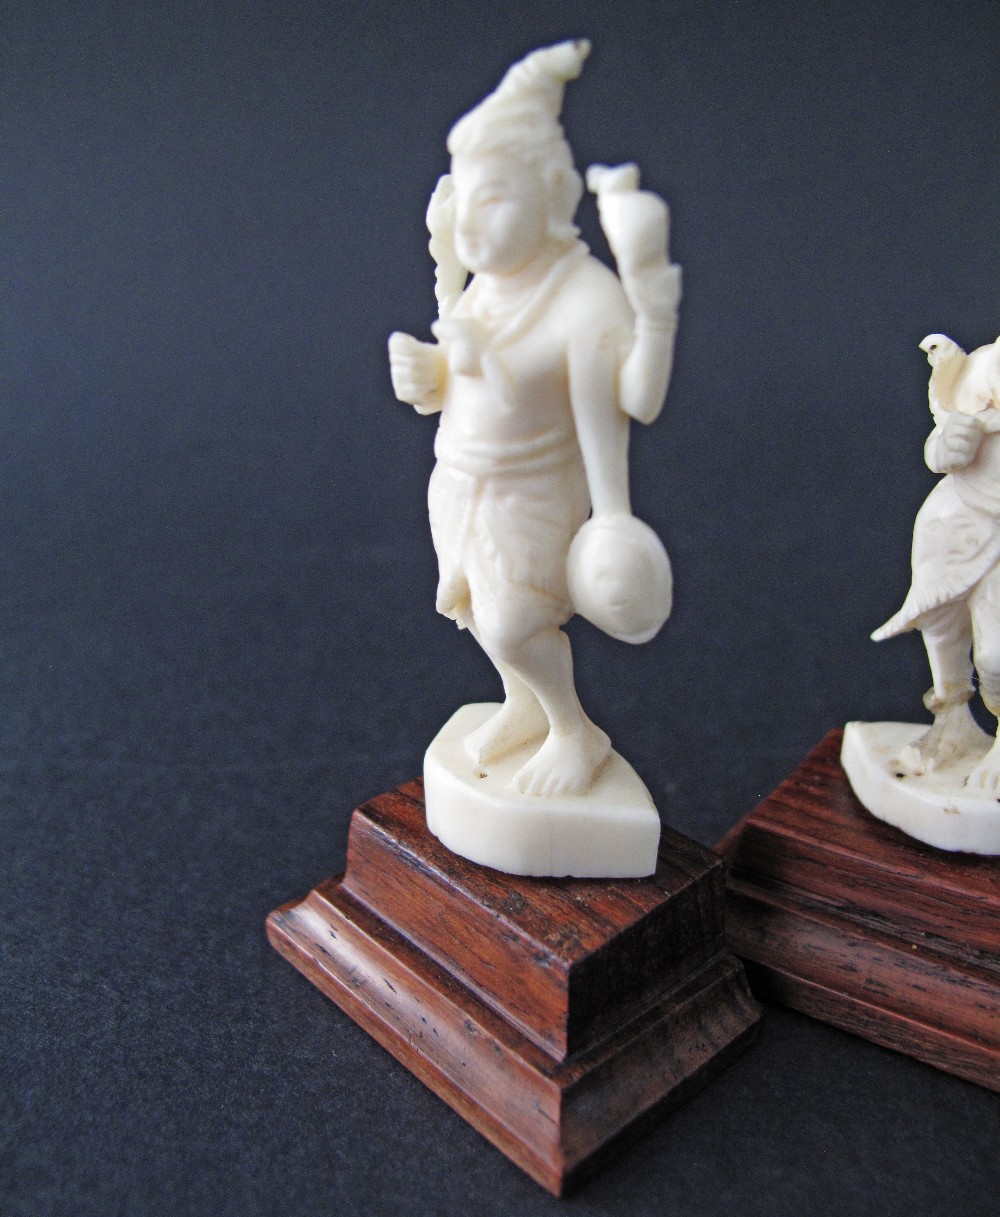 A pair of carved ivory figures, probably Vishnu one of the principal deities of Hinduism, on - Image 5 of 6